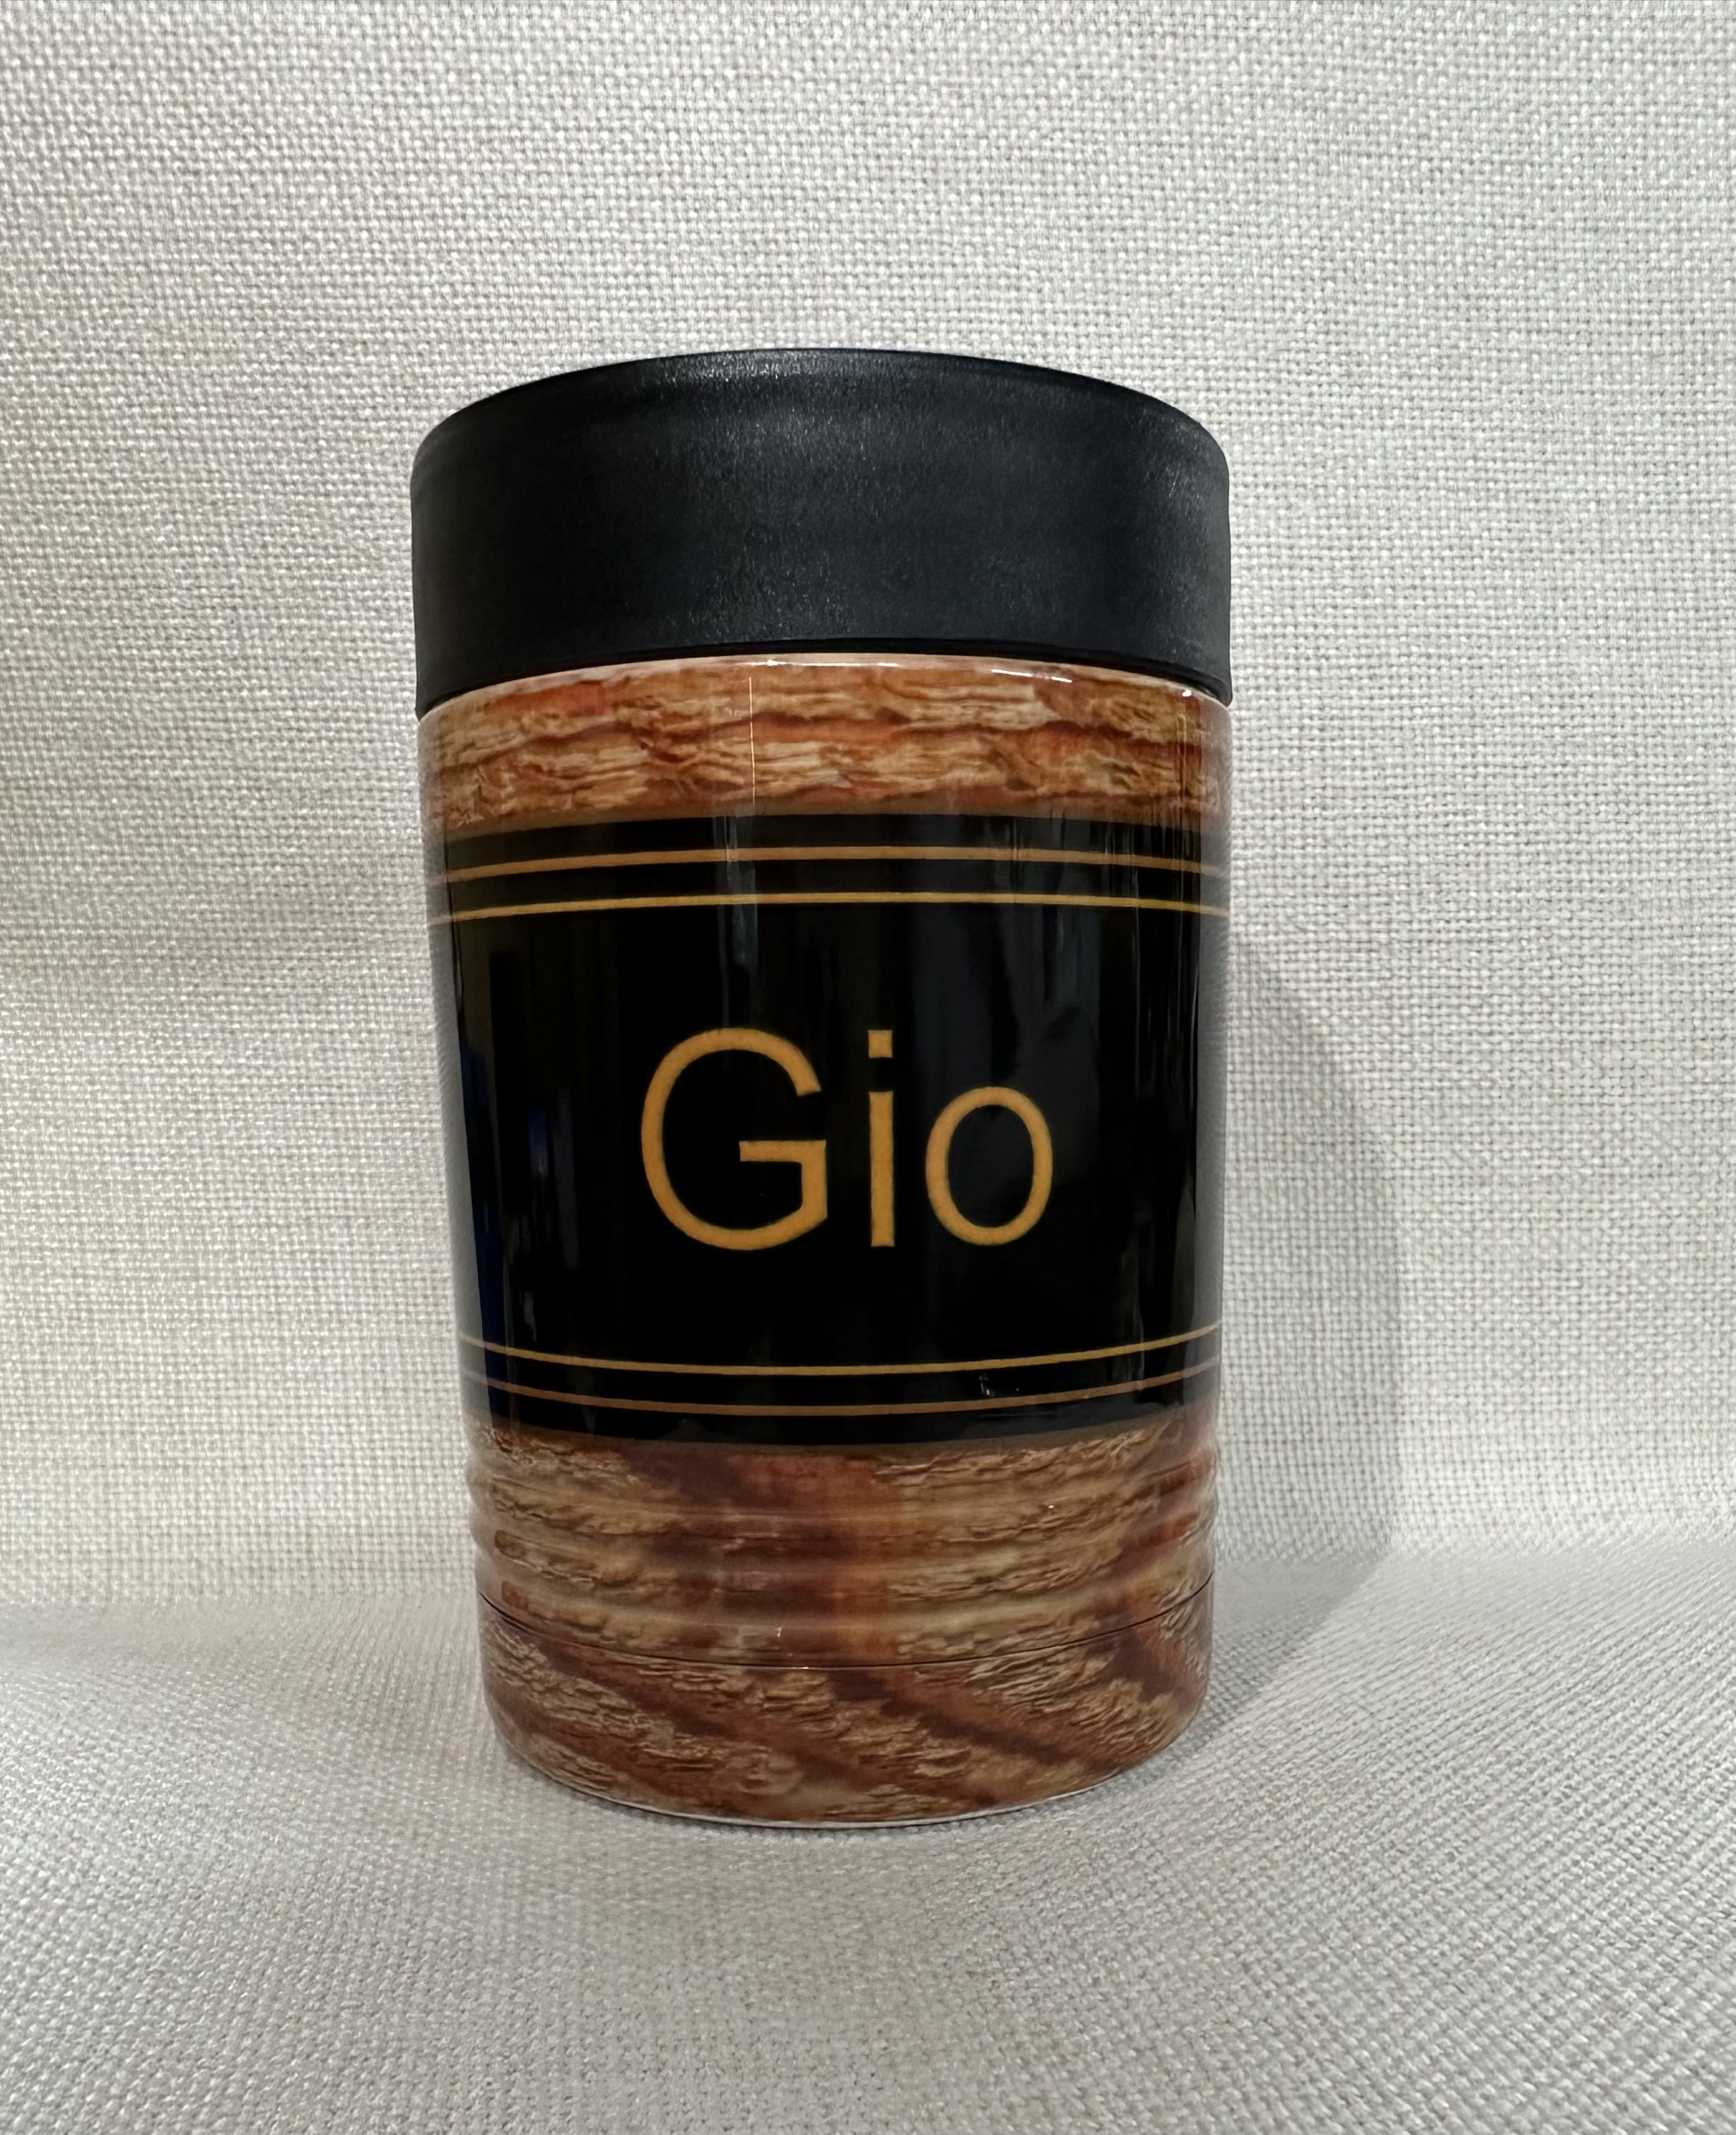 GIOWOOD made with sublimation printing